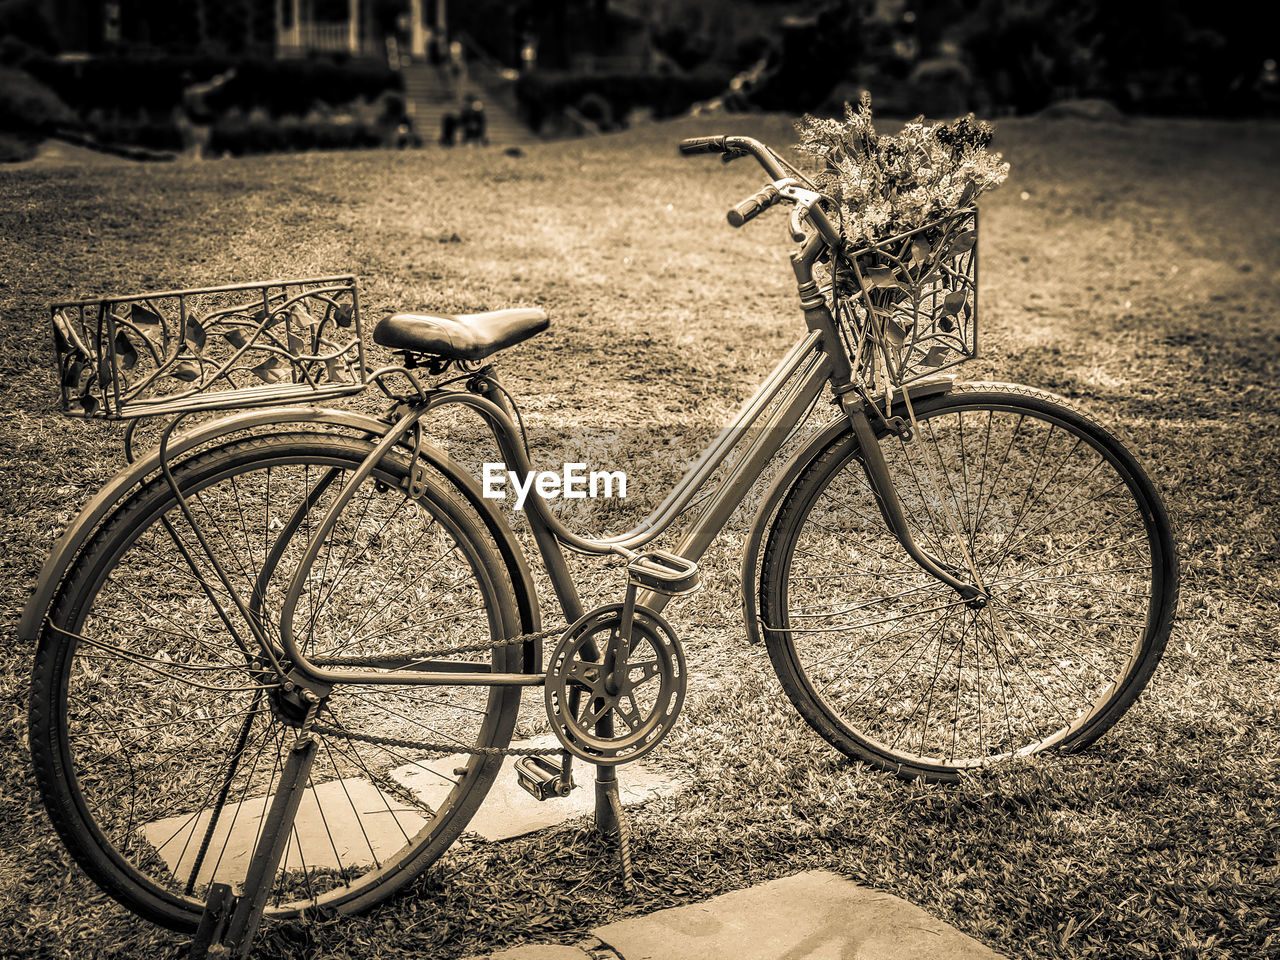 Bike in the garden Bike Garden Garden Photography Flower Lavanda Flower Sepia Photography Sepia_collection Lowlight Bicycle Architecture Art Iron - Metal Vintage Vintage Photo Vintage Style No People EyeEm Best Shots EyeEm Selects Sepia Toned Art And Craft Your Archive: Black & White